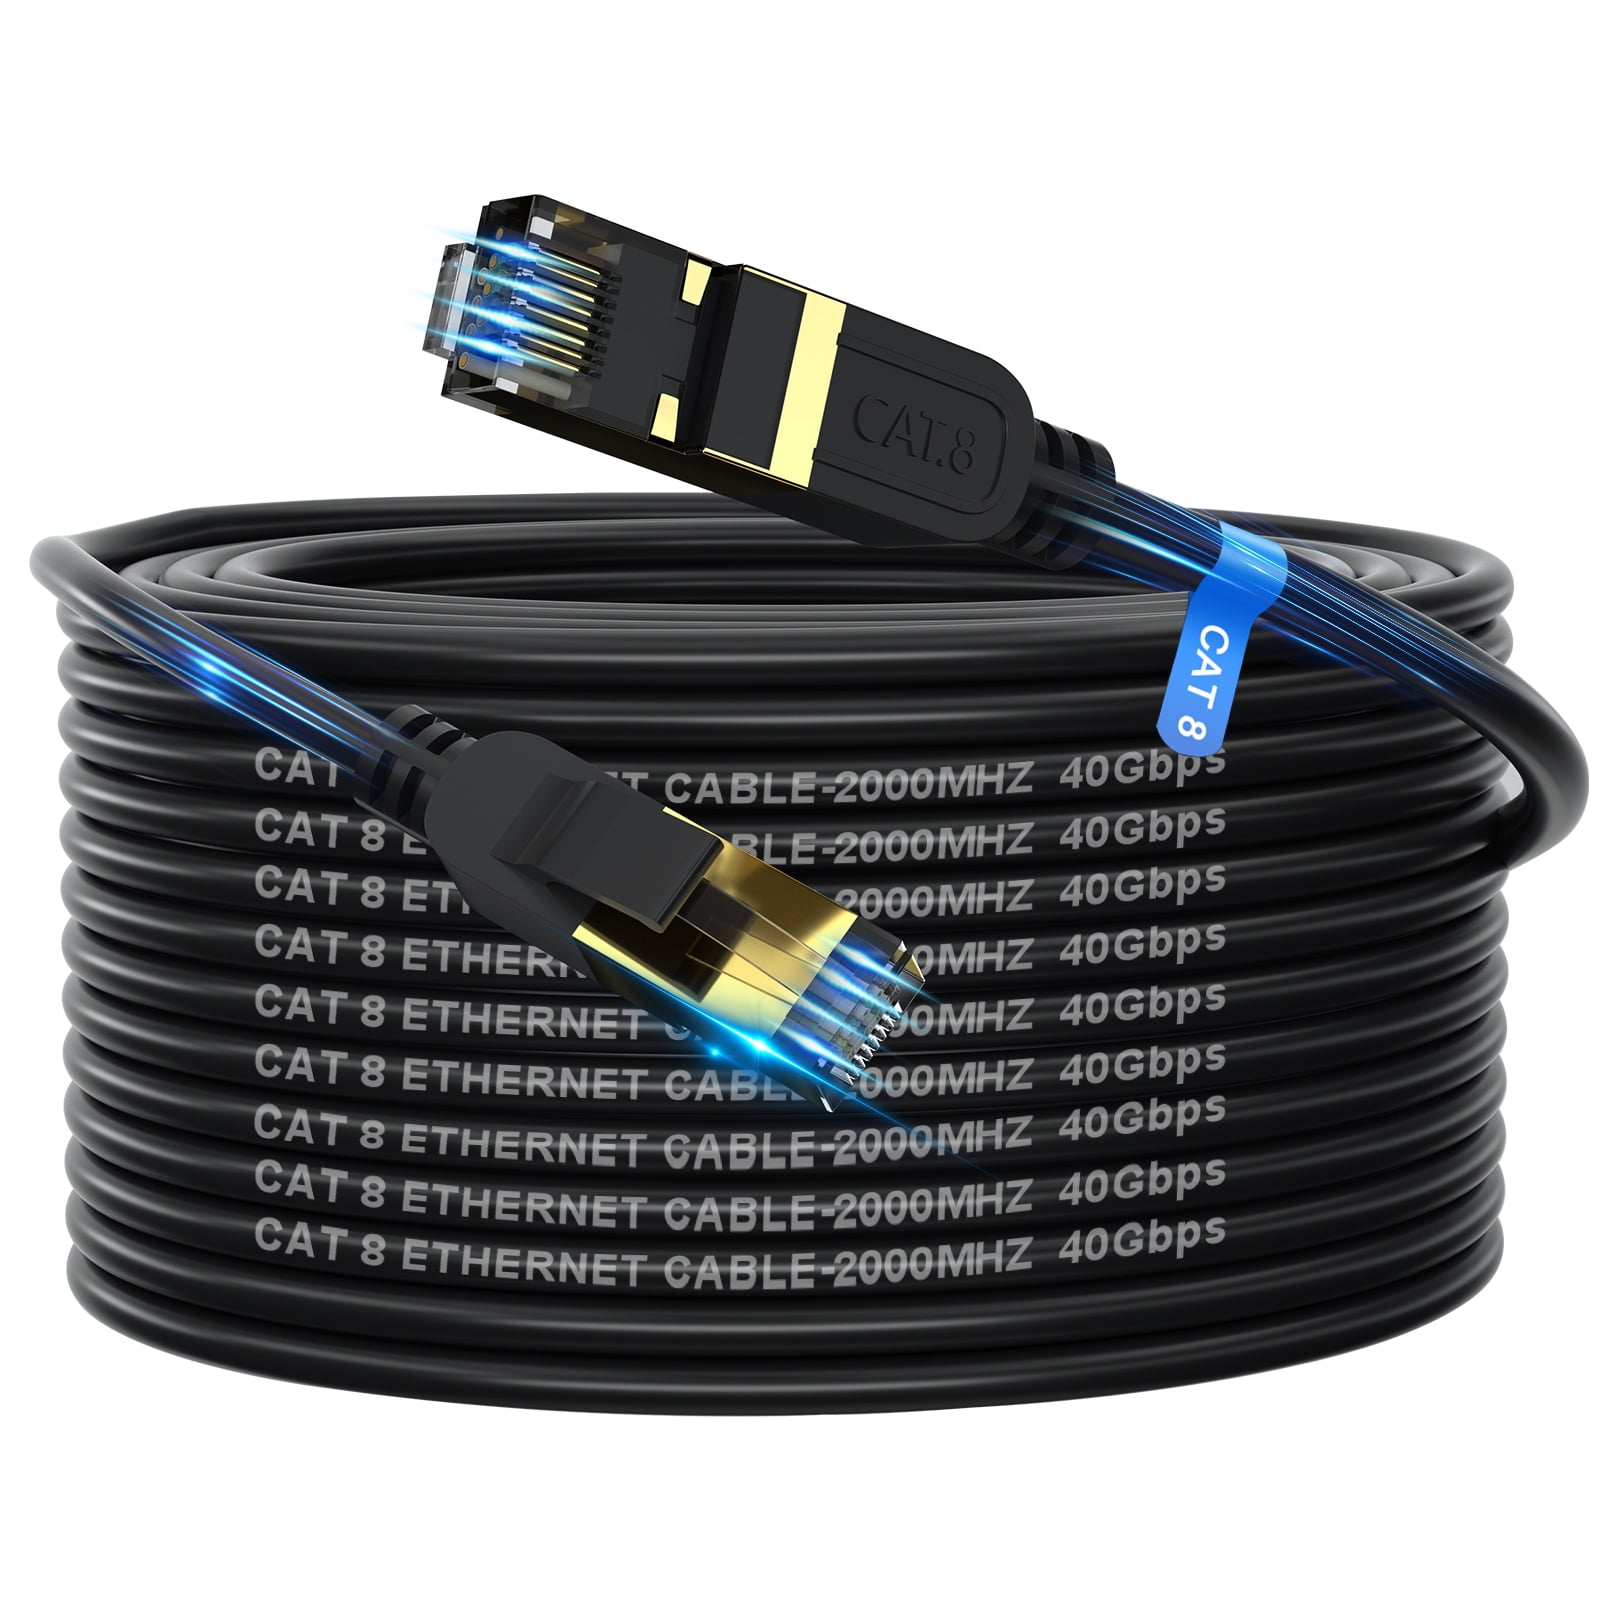 Cat 8 Ethernet RJ45 LAN Cable Super Speed 40Gbps Patch Network Gold Plated  (3ft), 1 - Fred Meyer